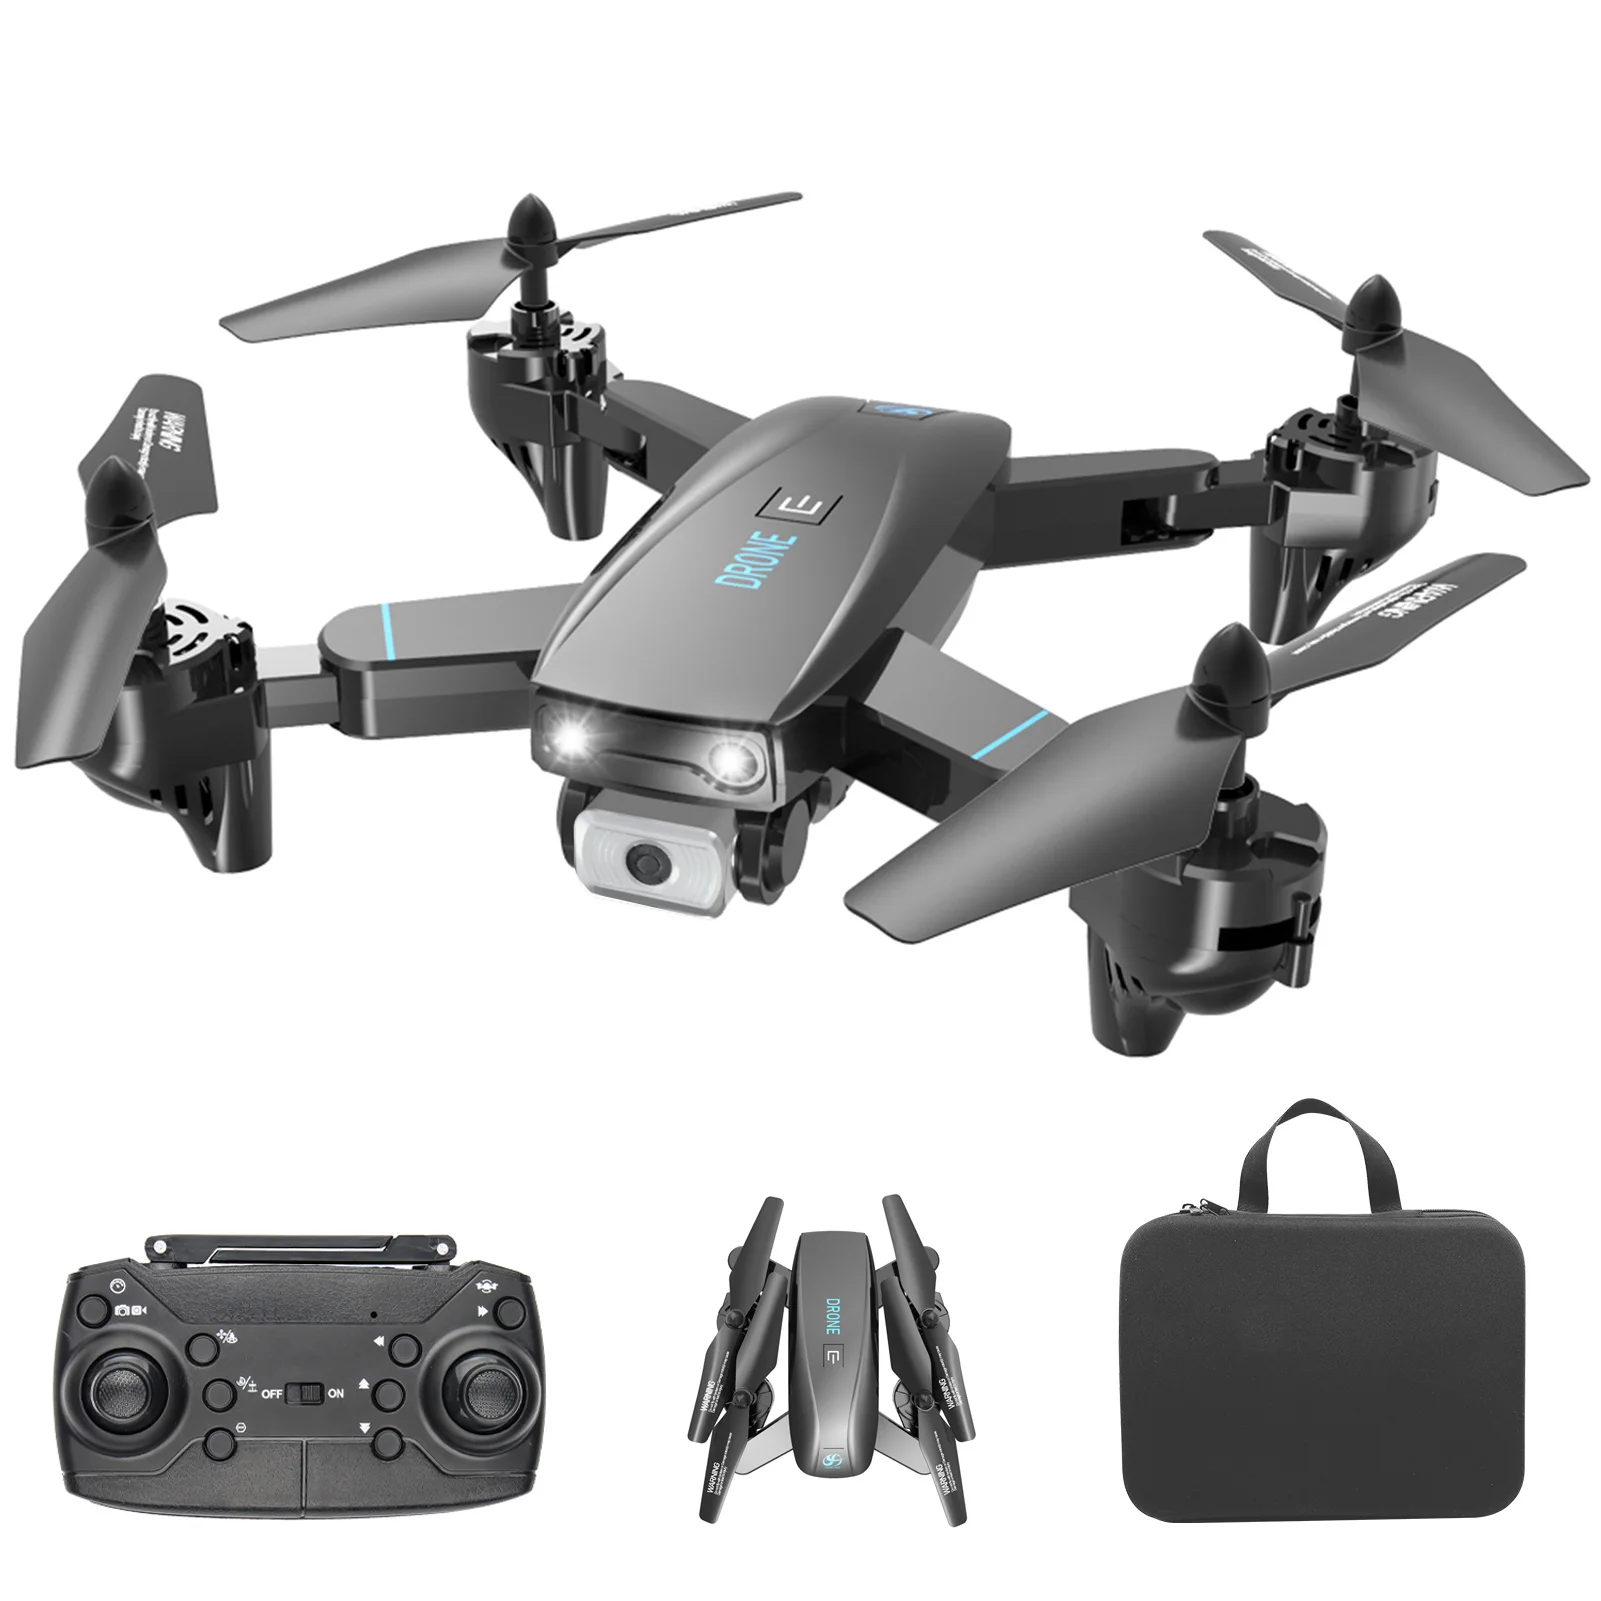 

S173 RC Drone with Camera 4K Dual Camera WiFi FPV Foldable Quadcopter Function Trajectory Flight Headless Mode 3D Flight